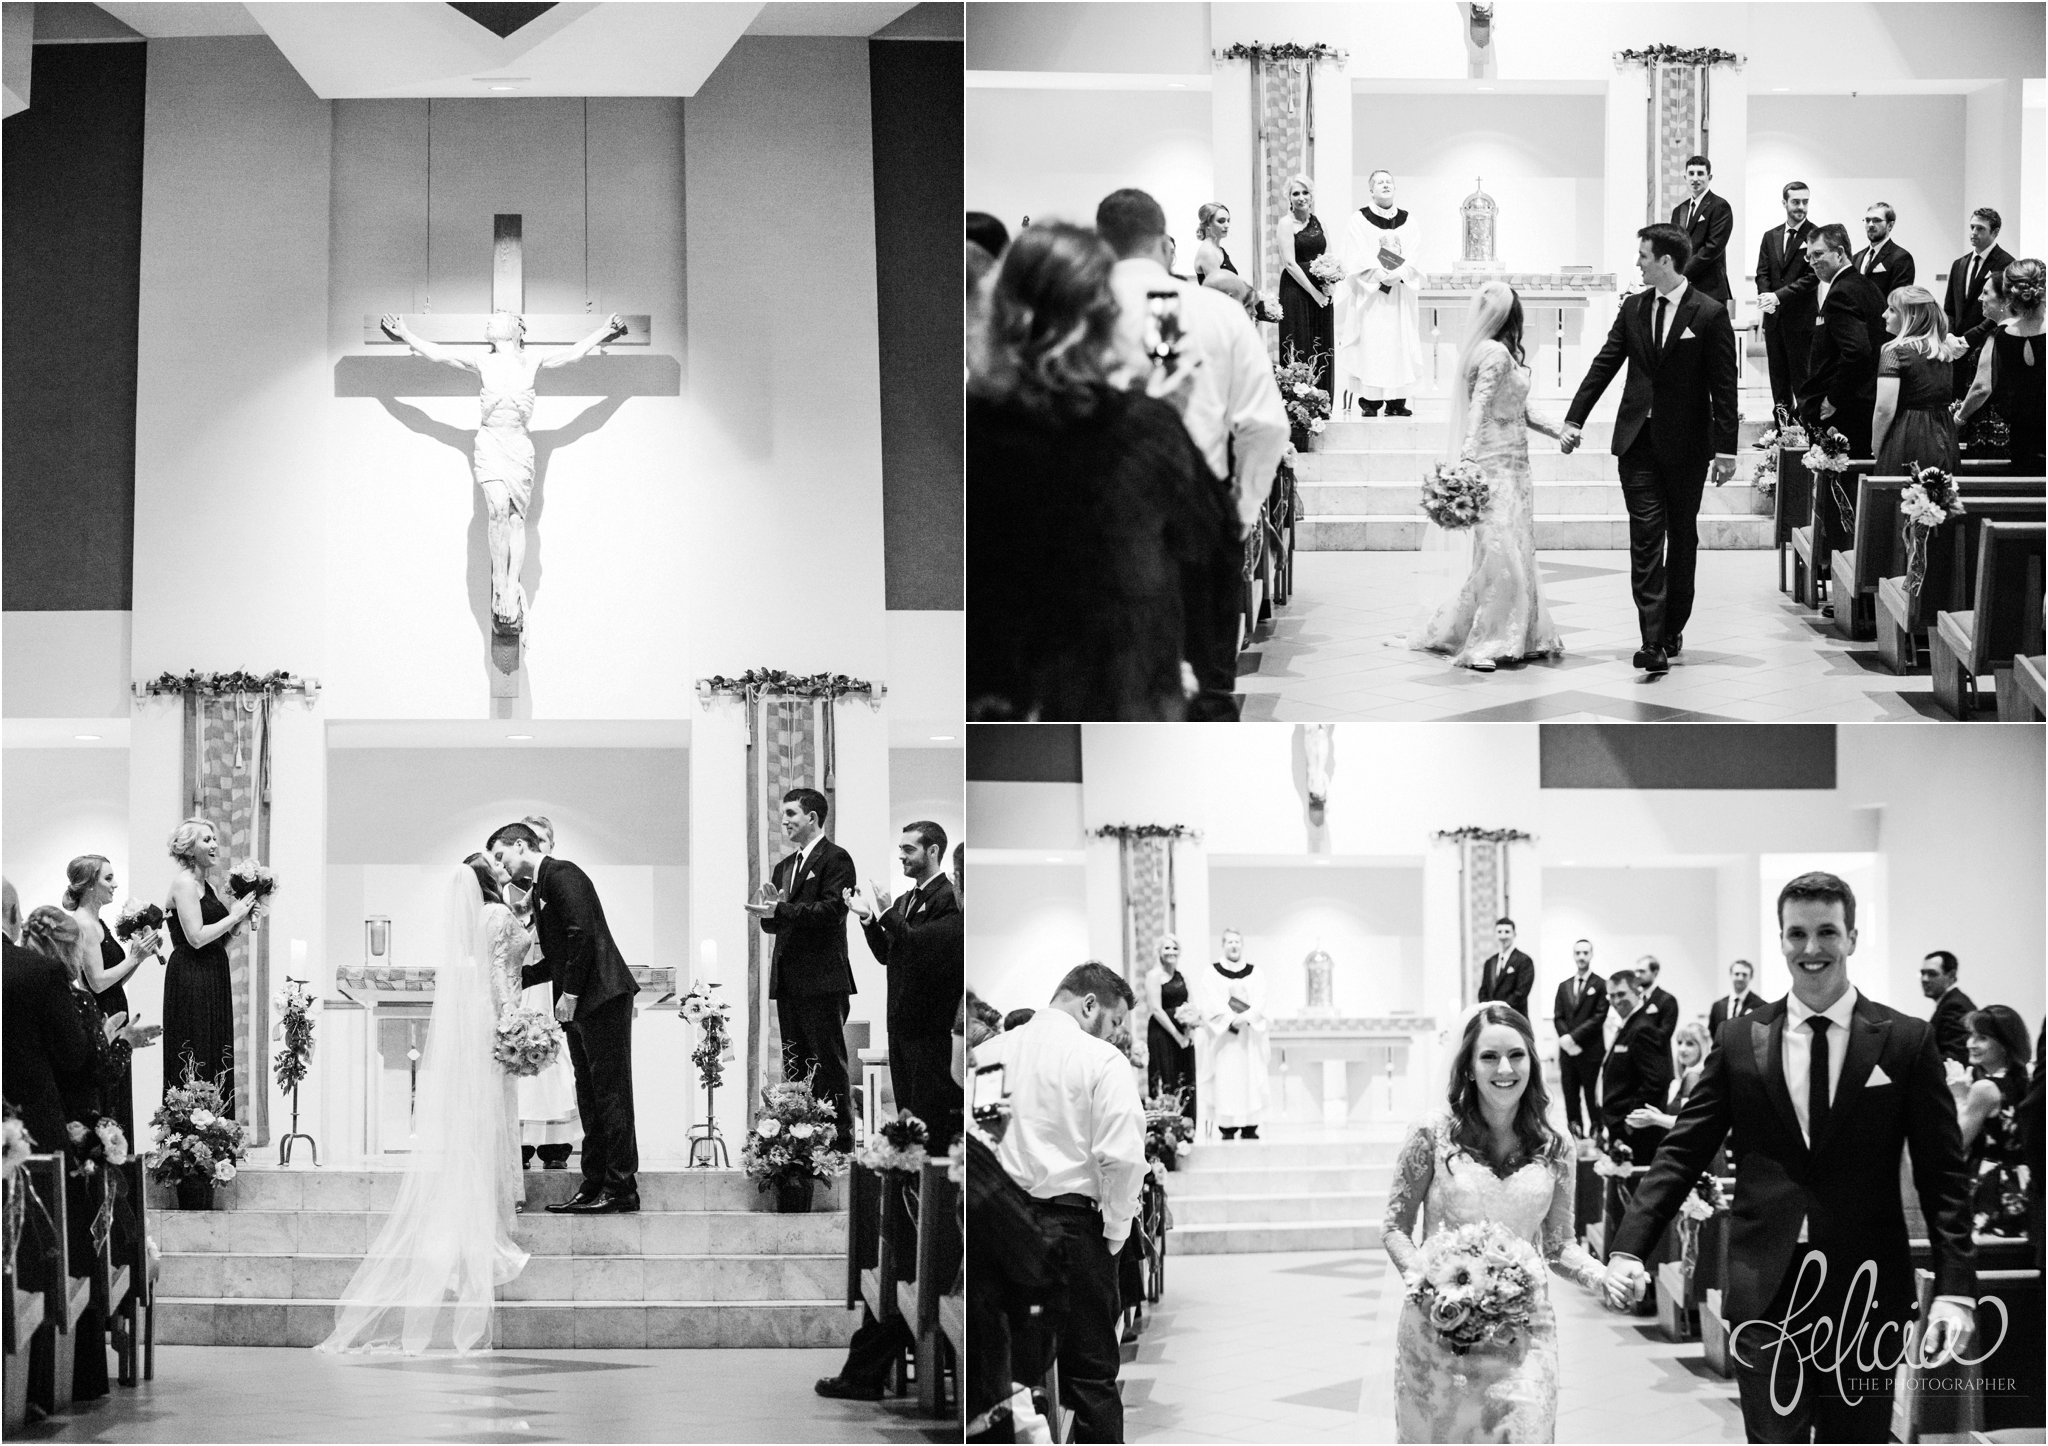 black and white | weddings | wedding photos | wedding photography | images by feliciathephotographer.com | St. Therese Catholic Church | Kansas City | downtown | The Terrace on Grand | the ceremony | wedding ceremony | first kiss | man and wife | walking down the aisle | man and wife 